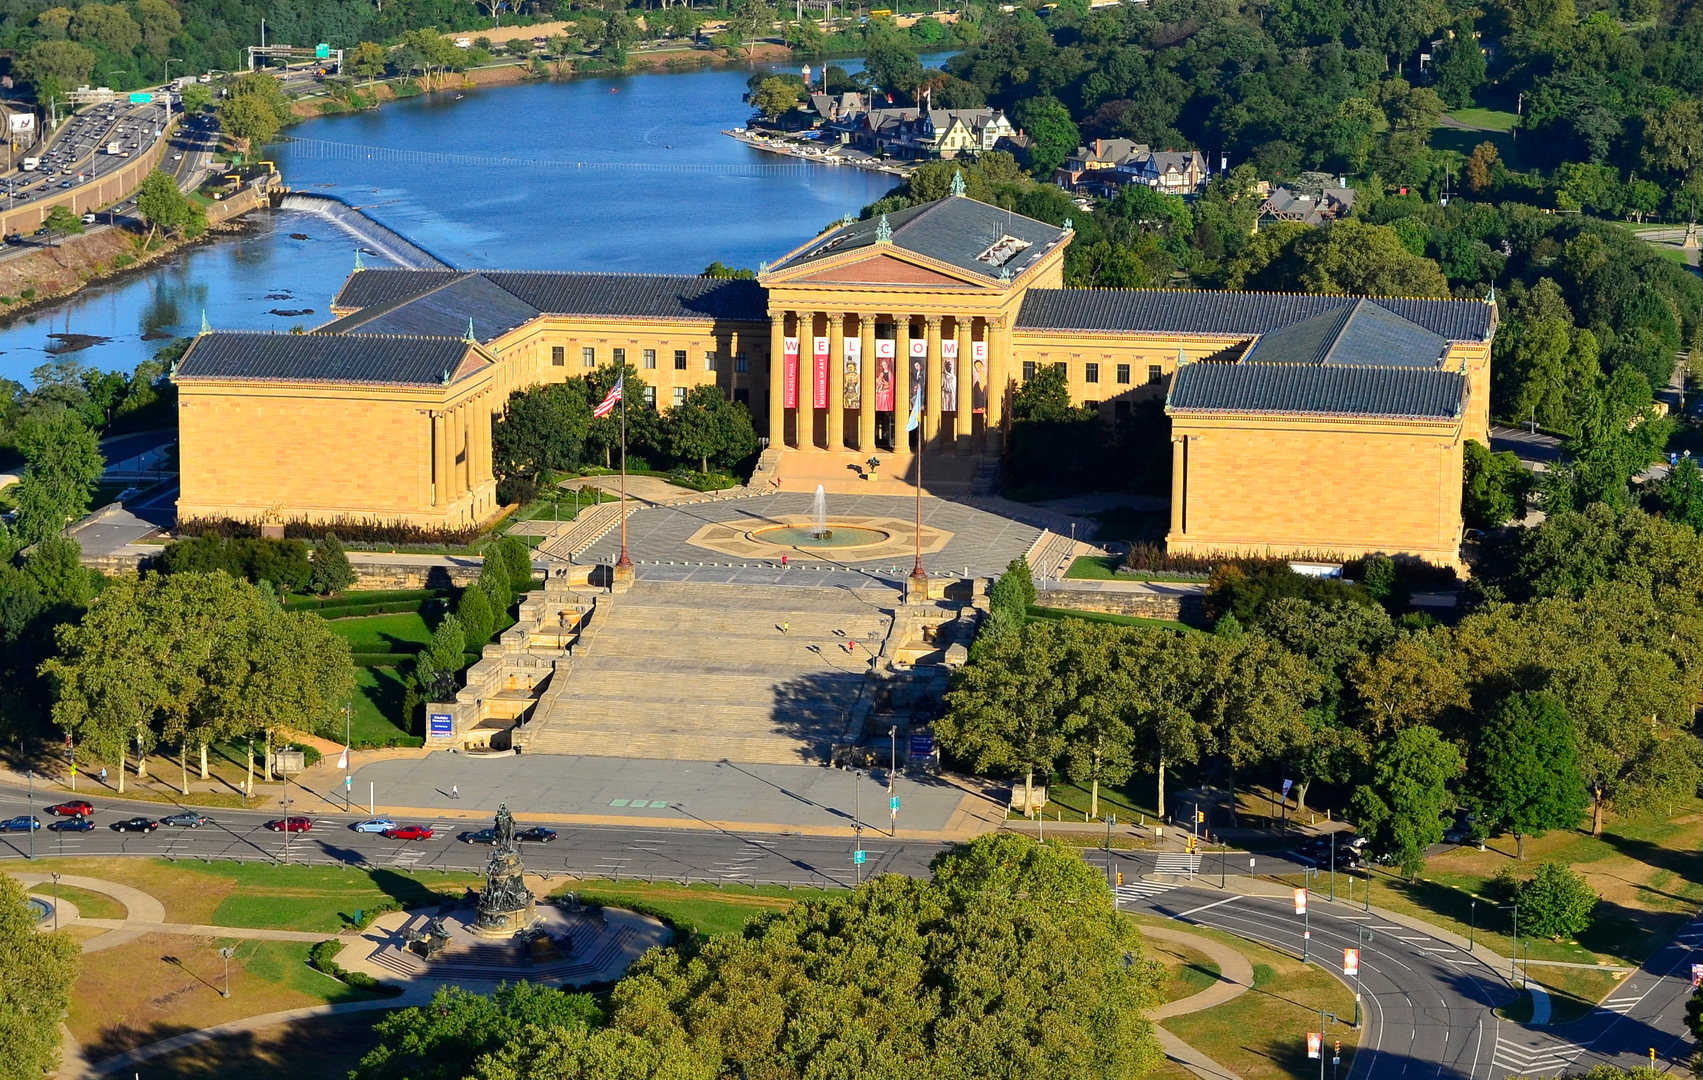 Aerial photograph showing the Philadelphia Museum of Art, a Greek Revival building, and surrounding environment.